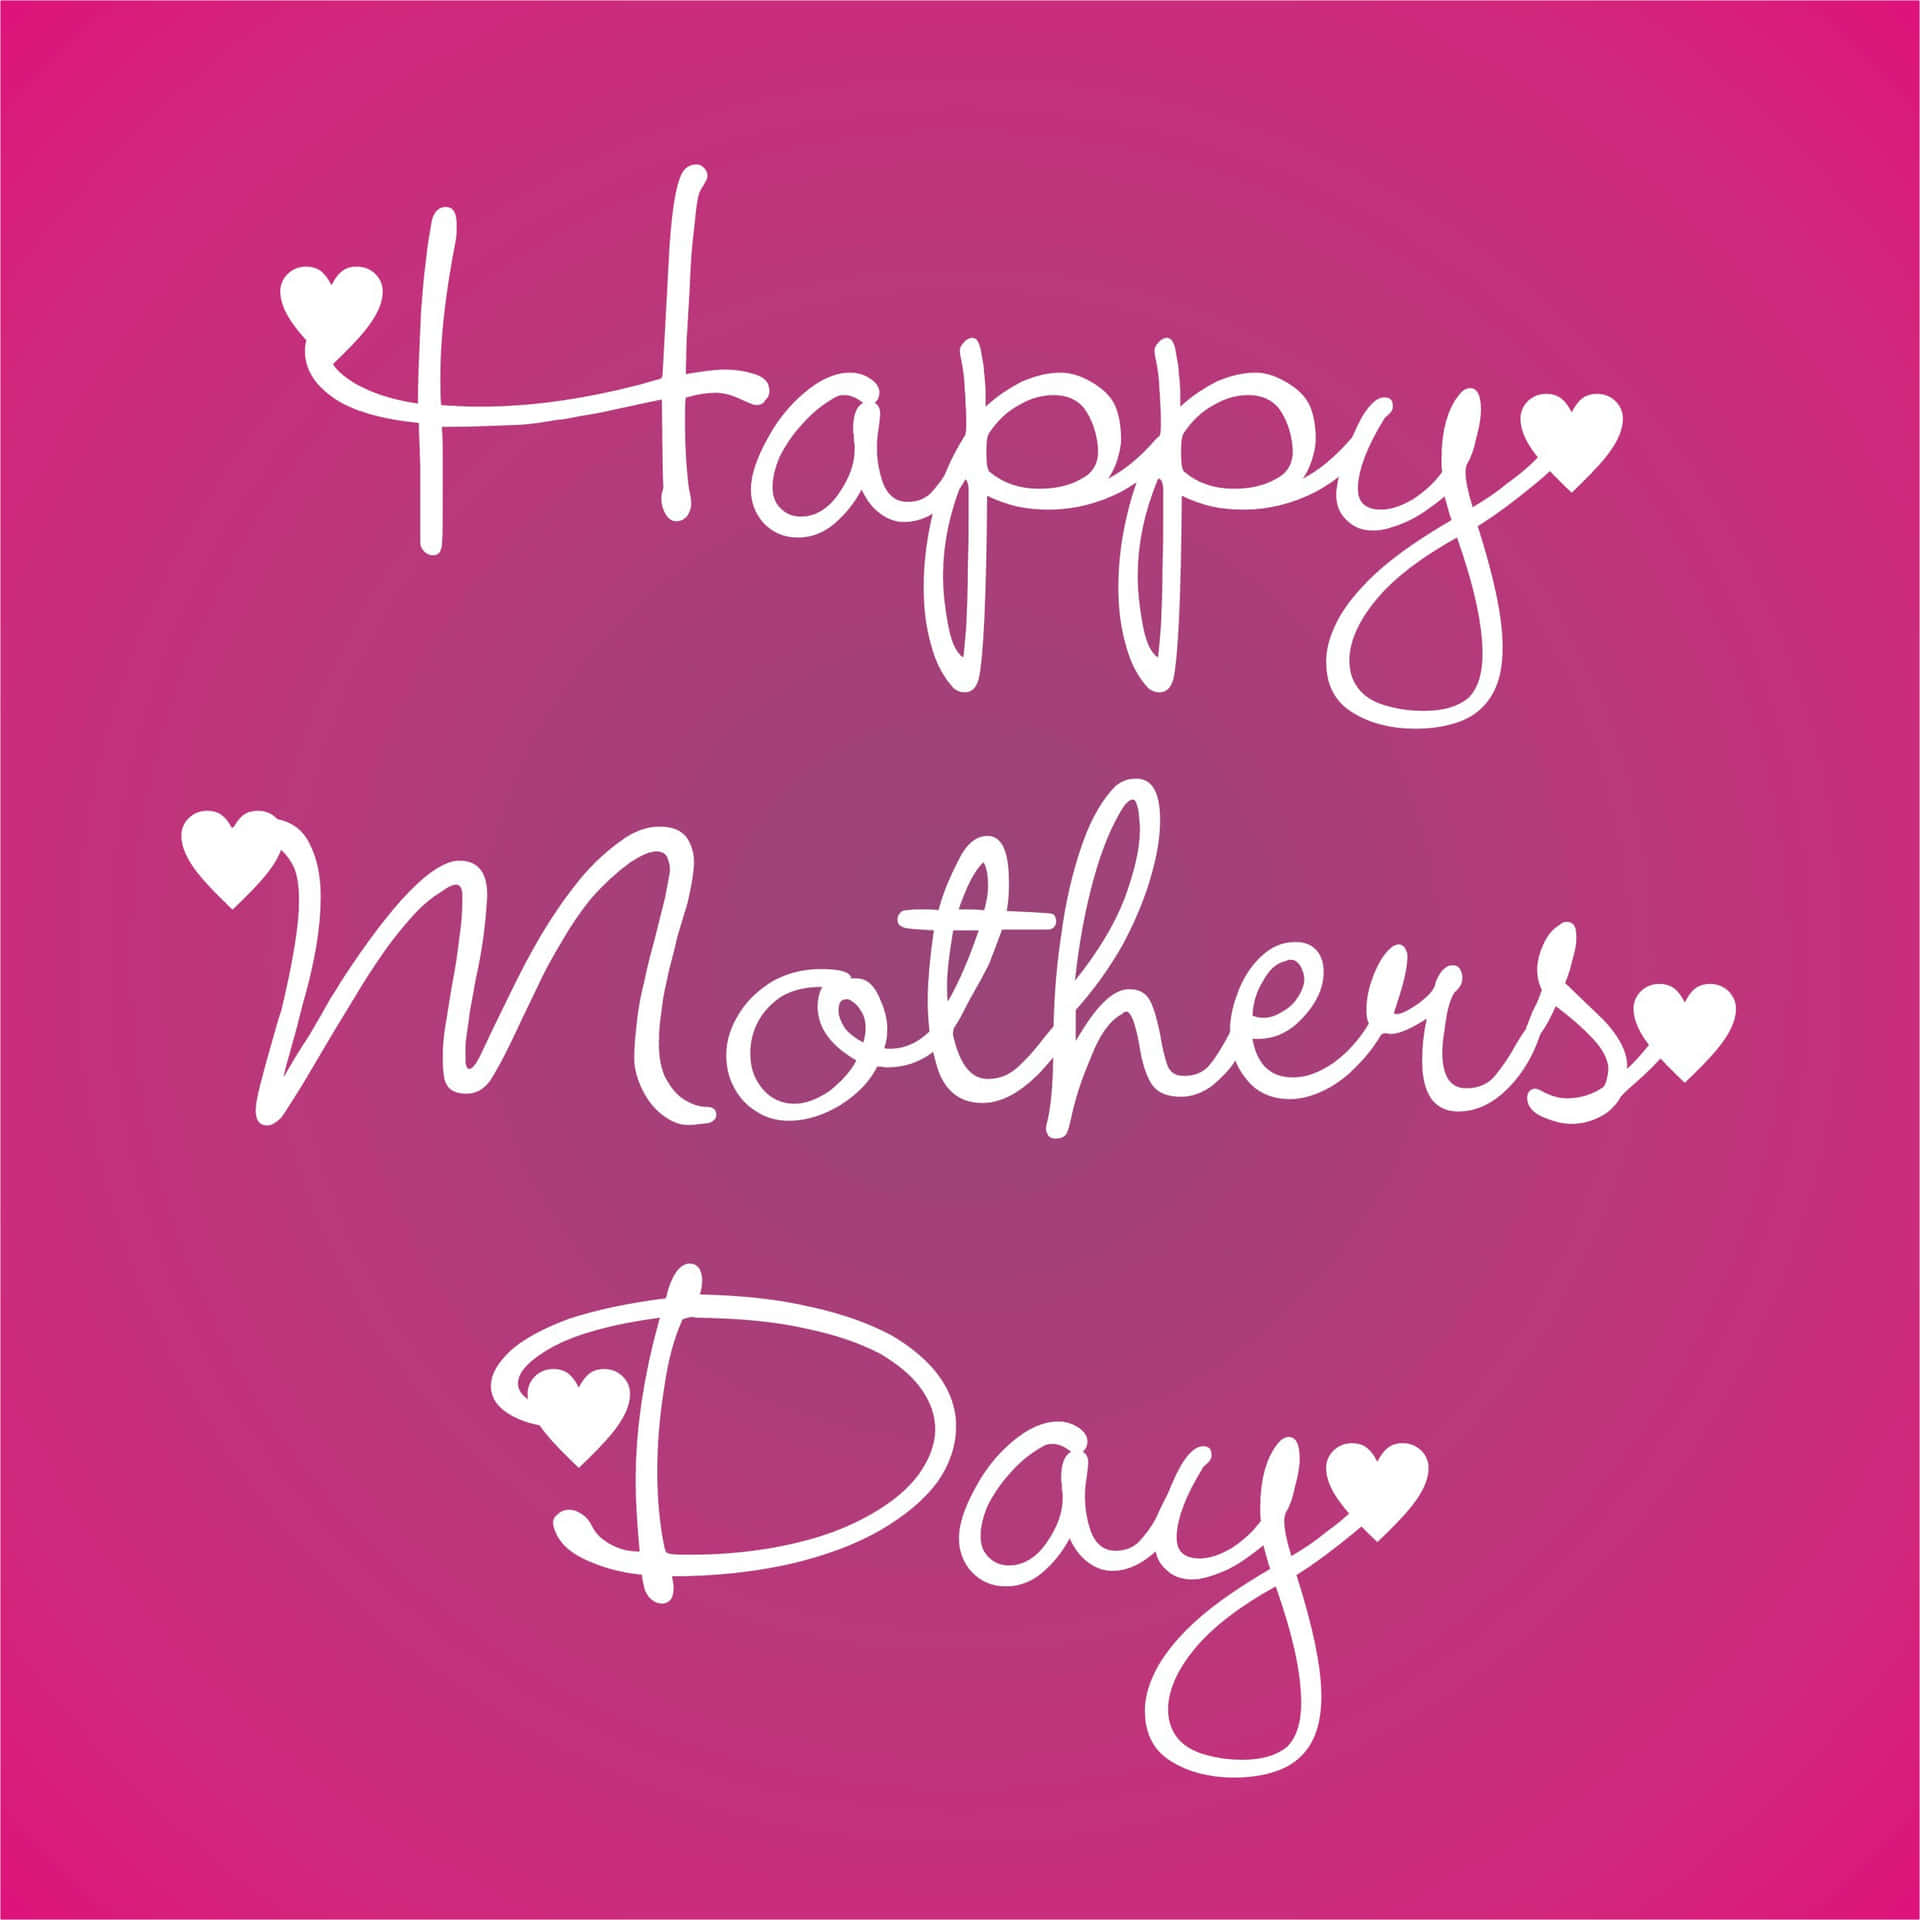 Happy Mothers Day Greeting Card With Hearts On Pink Background